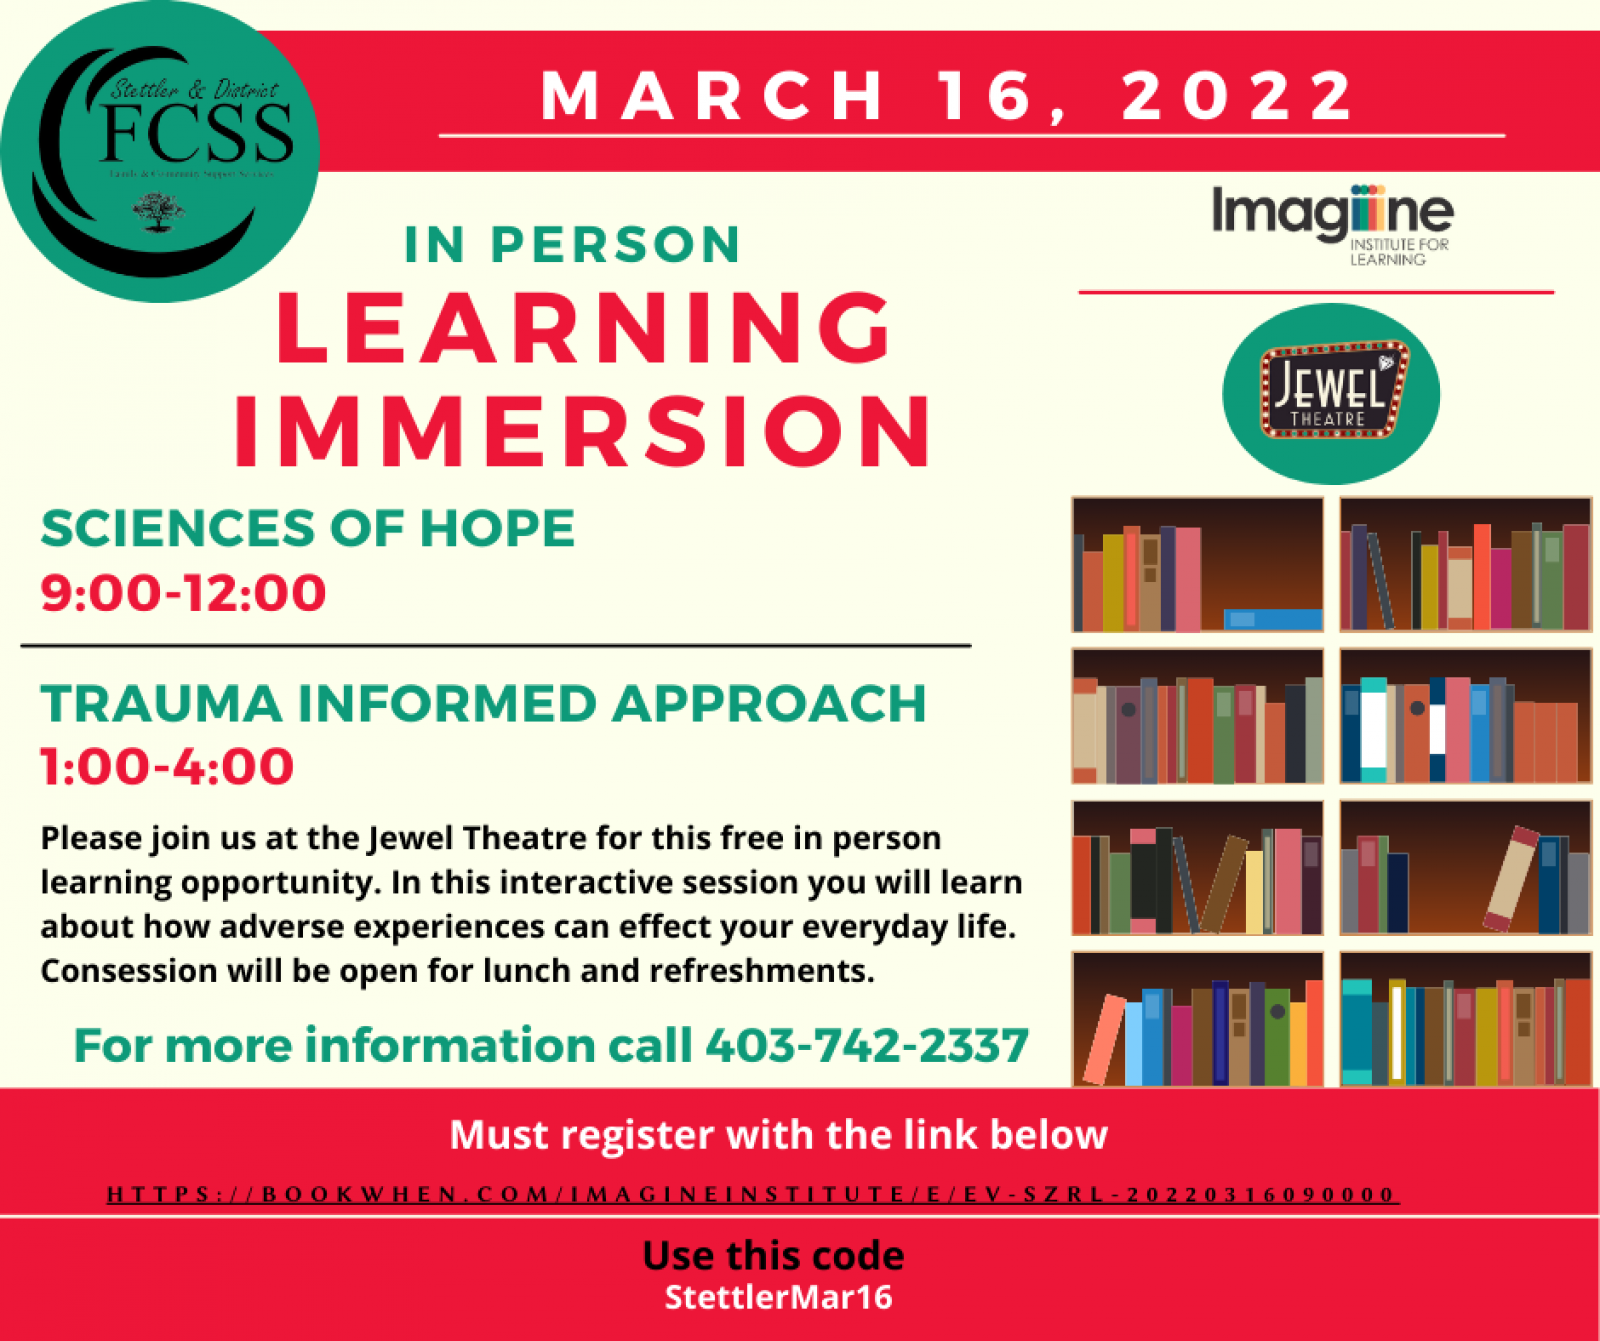 Learning immersion